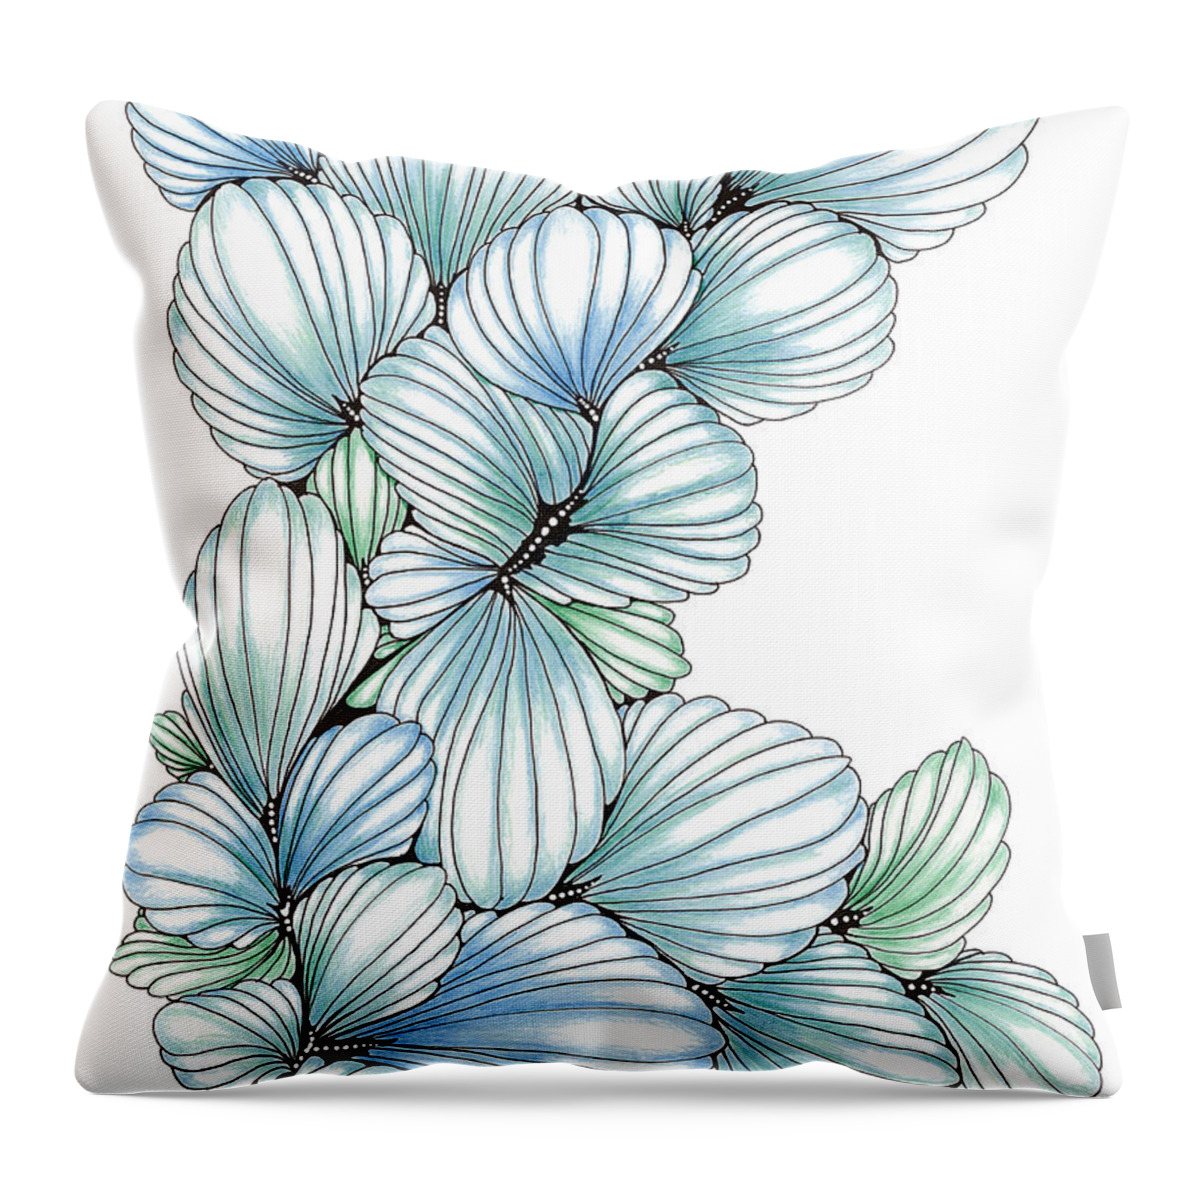 Plume Throw Pillow featuring the drawing Pearlescent Plume by Alexandra Louie